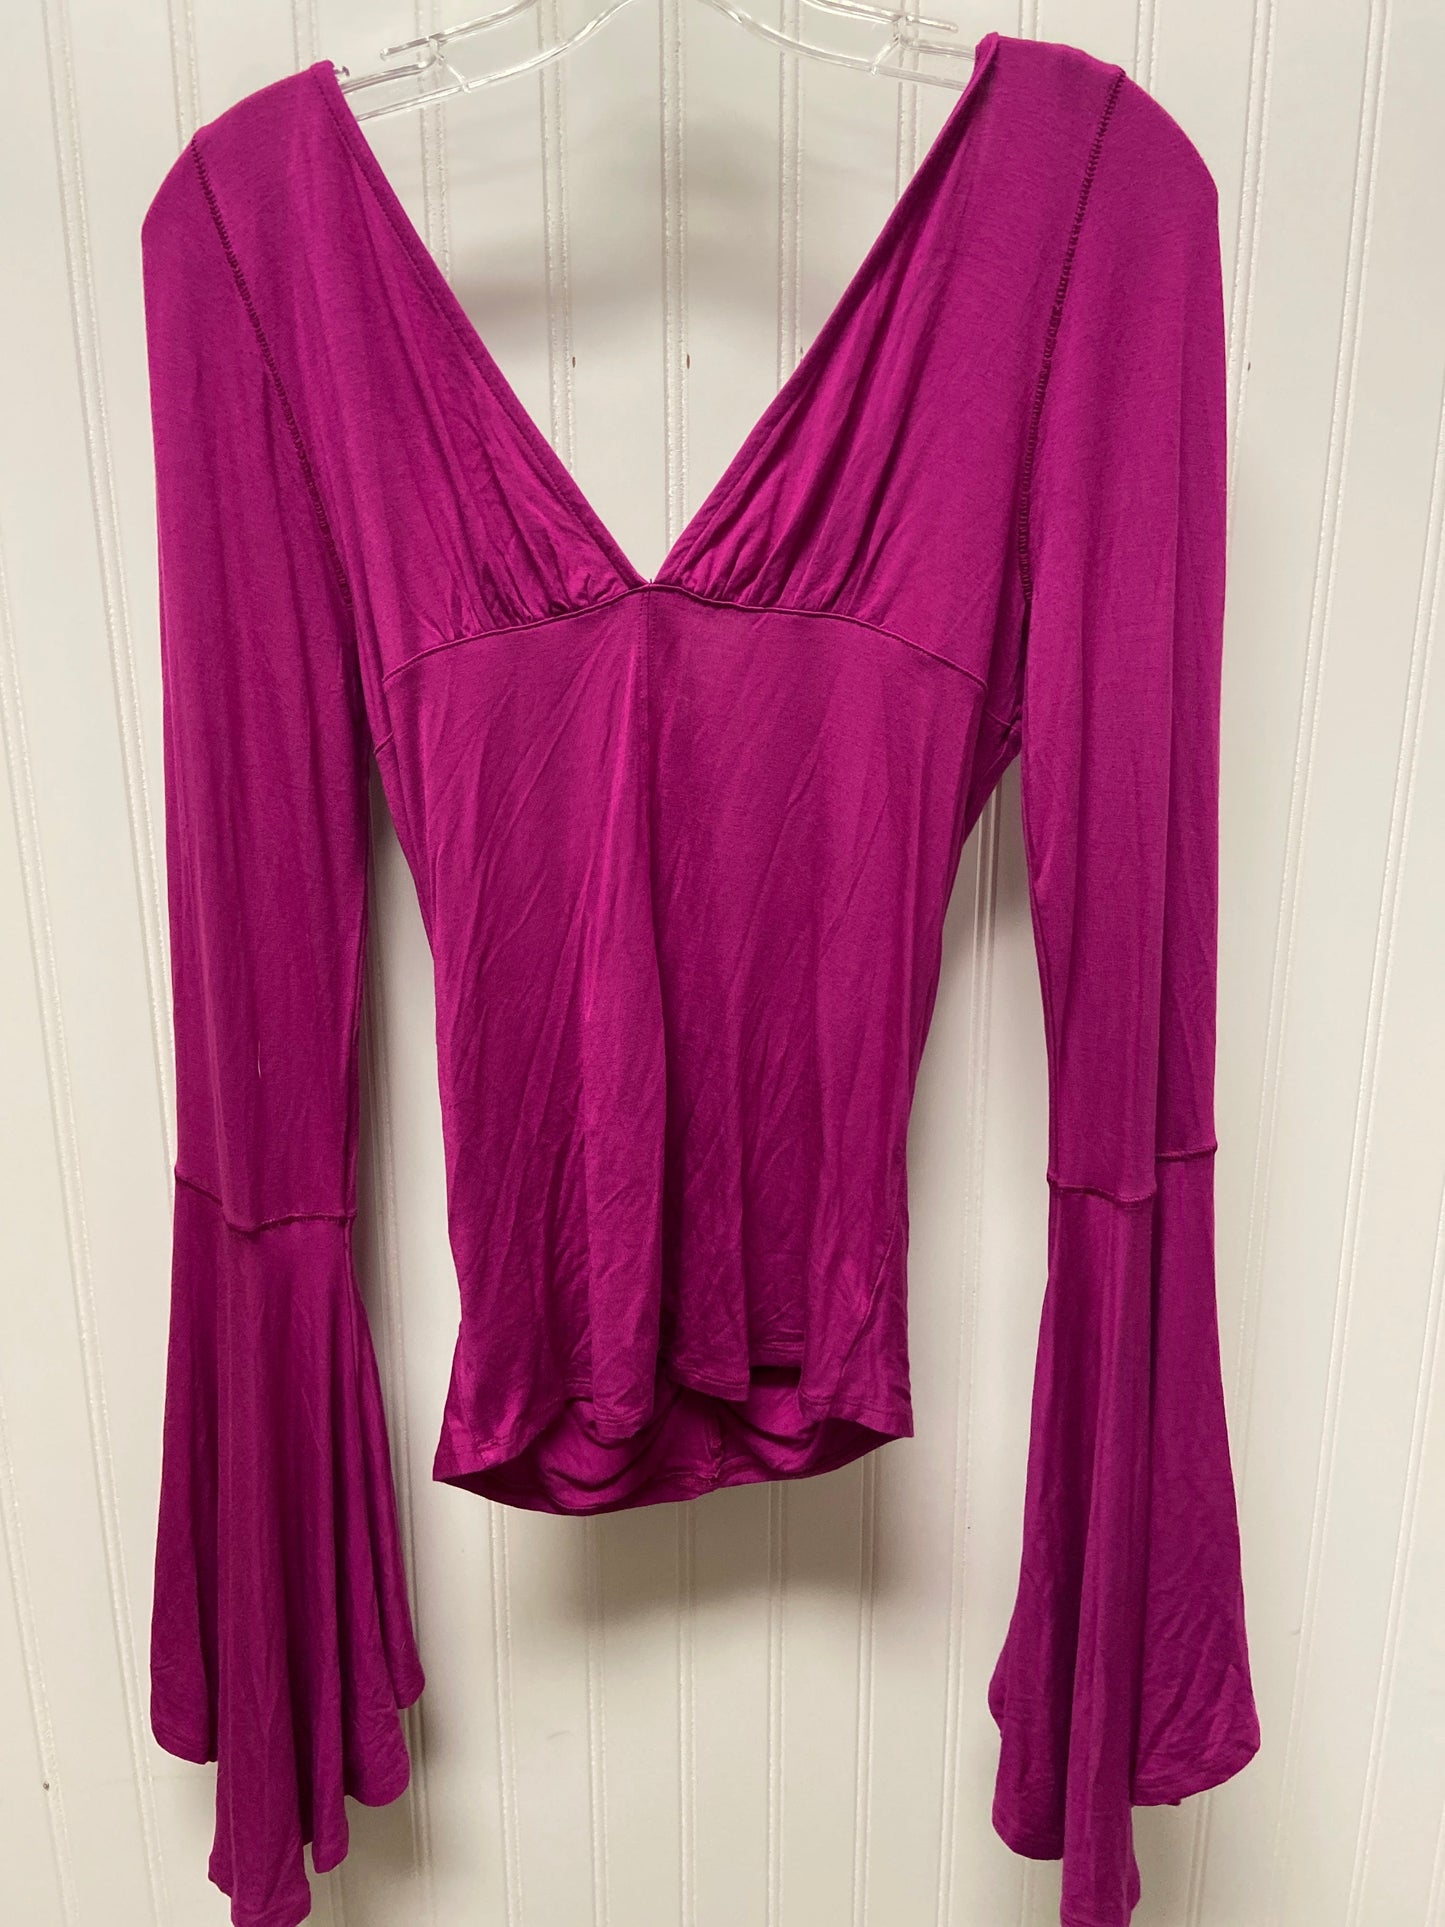 Purple Top Long Sleeve We The Free, Size M